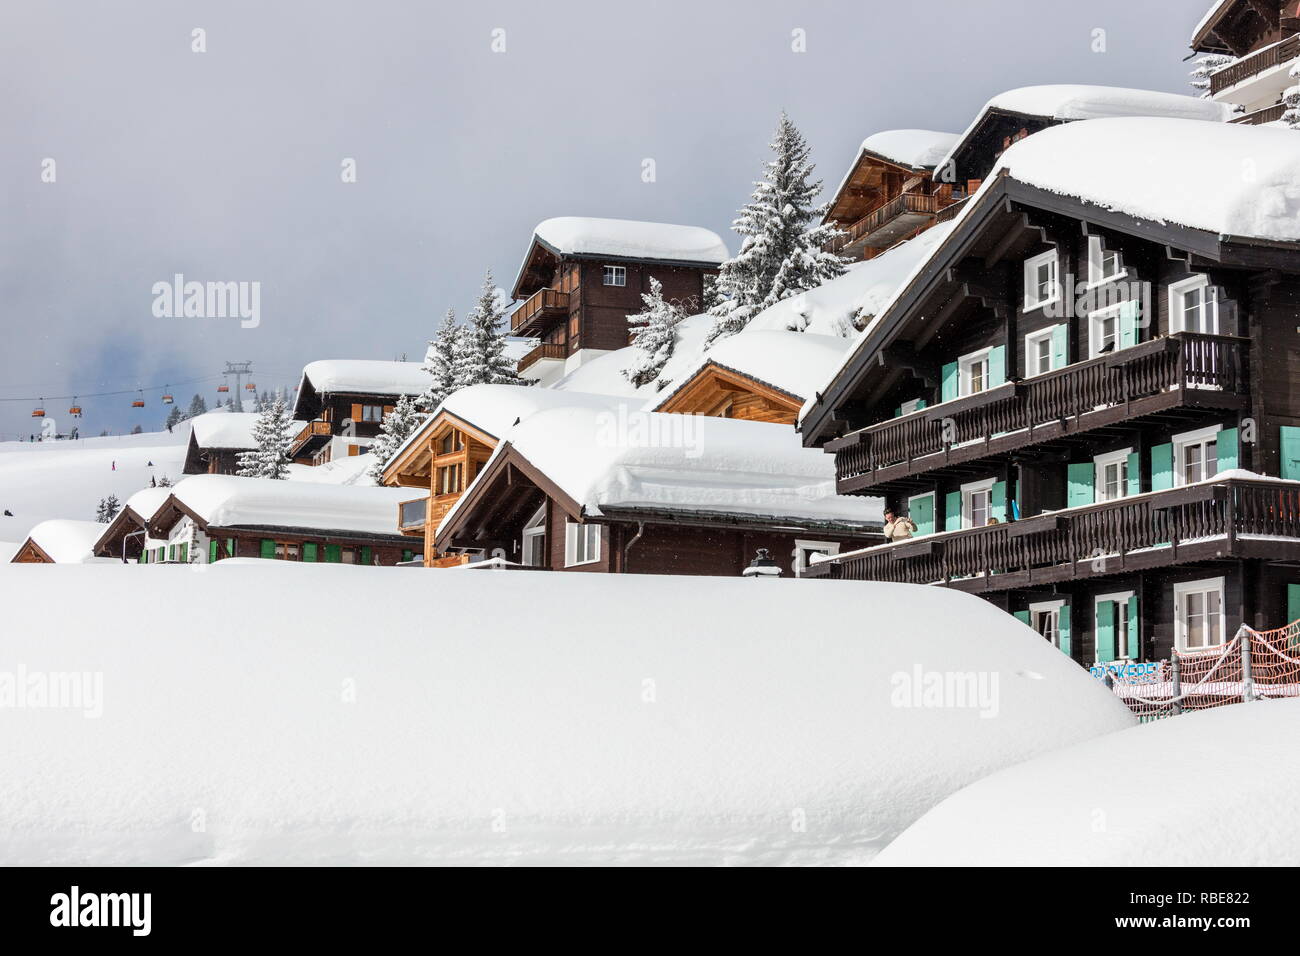 Snow and wooden houses in the alpine village and sky resort Bettmeralp district of Raron canton of Valais Switzerland Europe Stock Photo